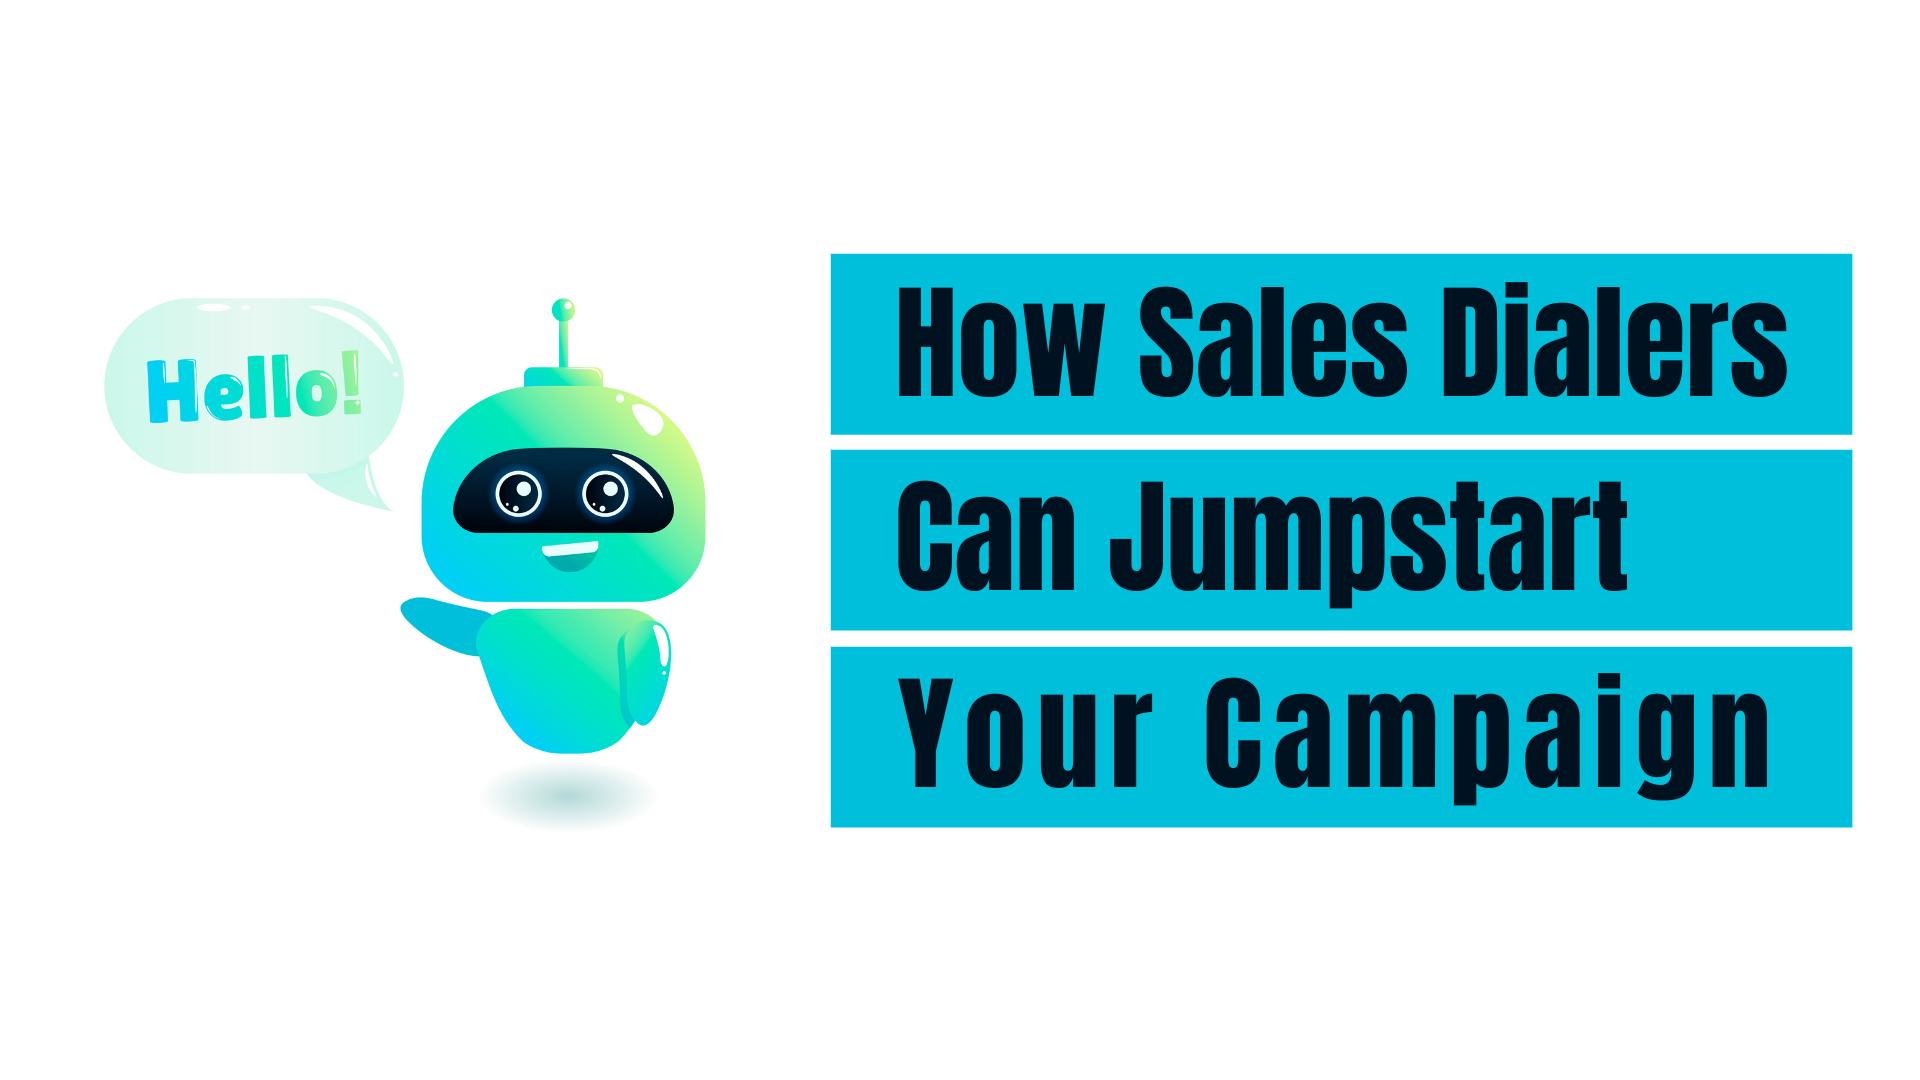 How Sales Dialers Can Jumpstart Your Campaign